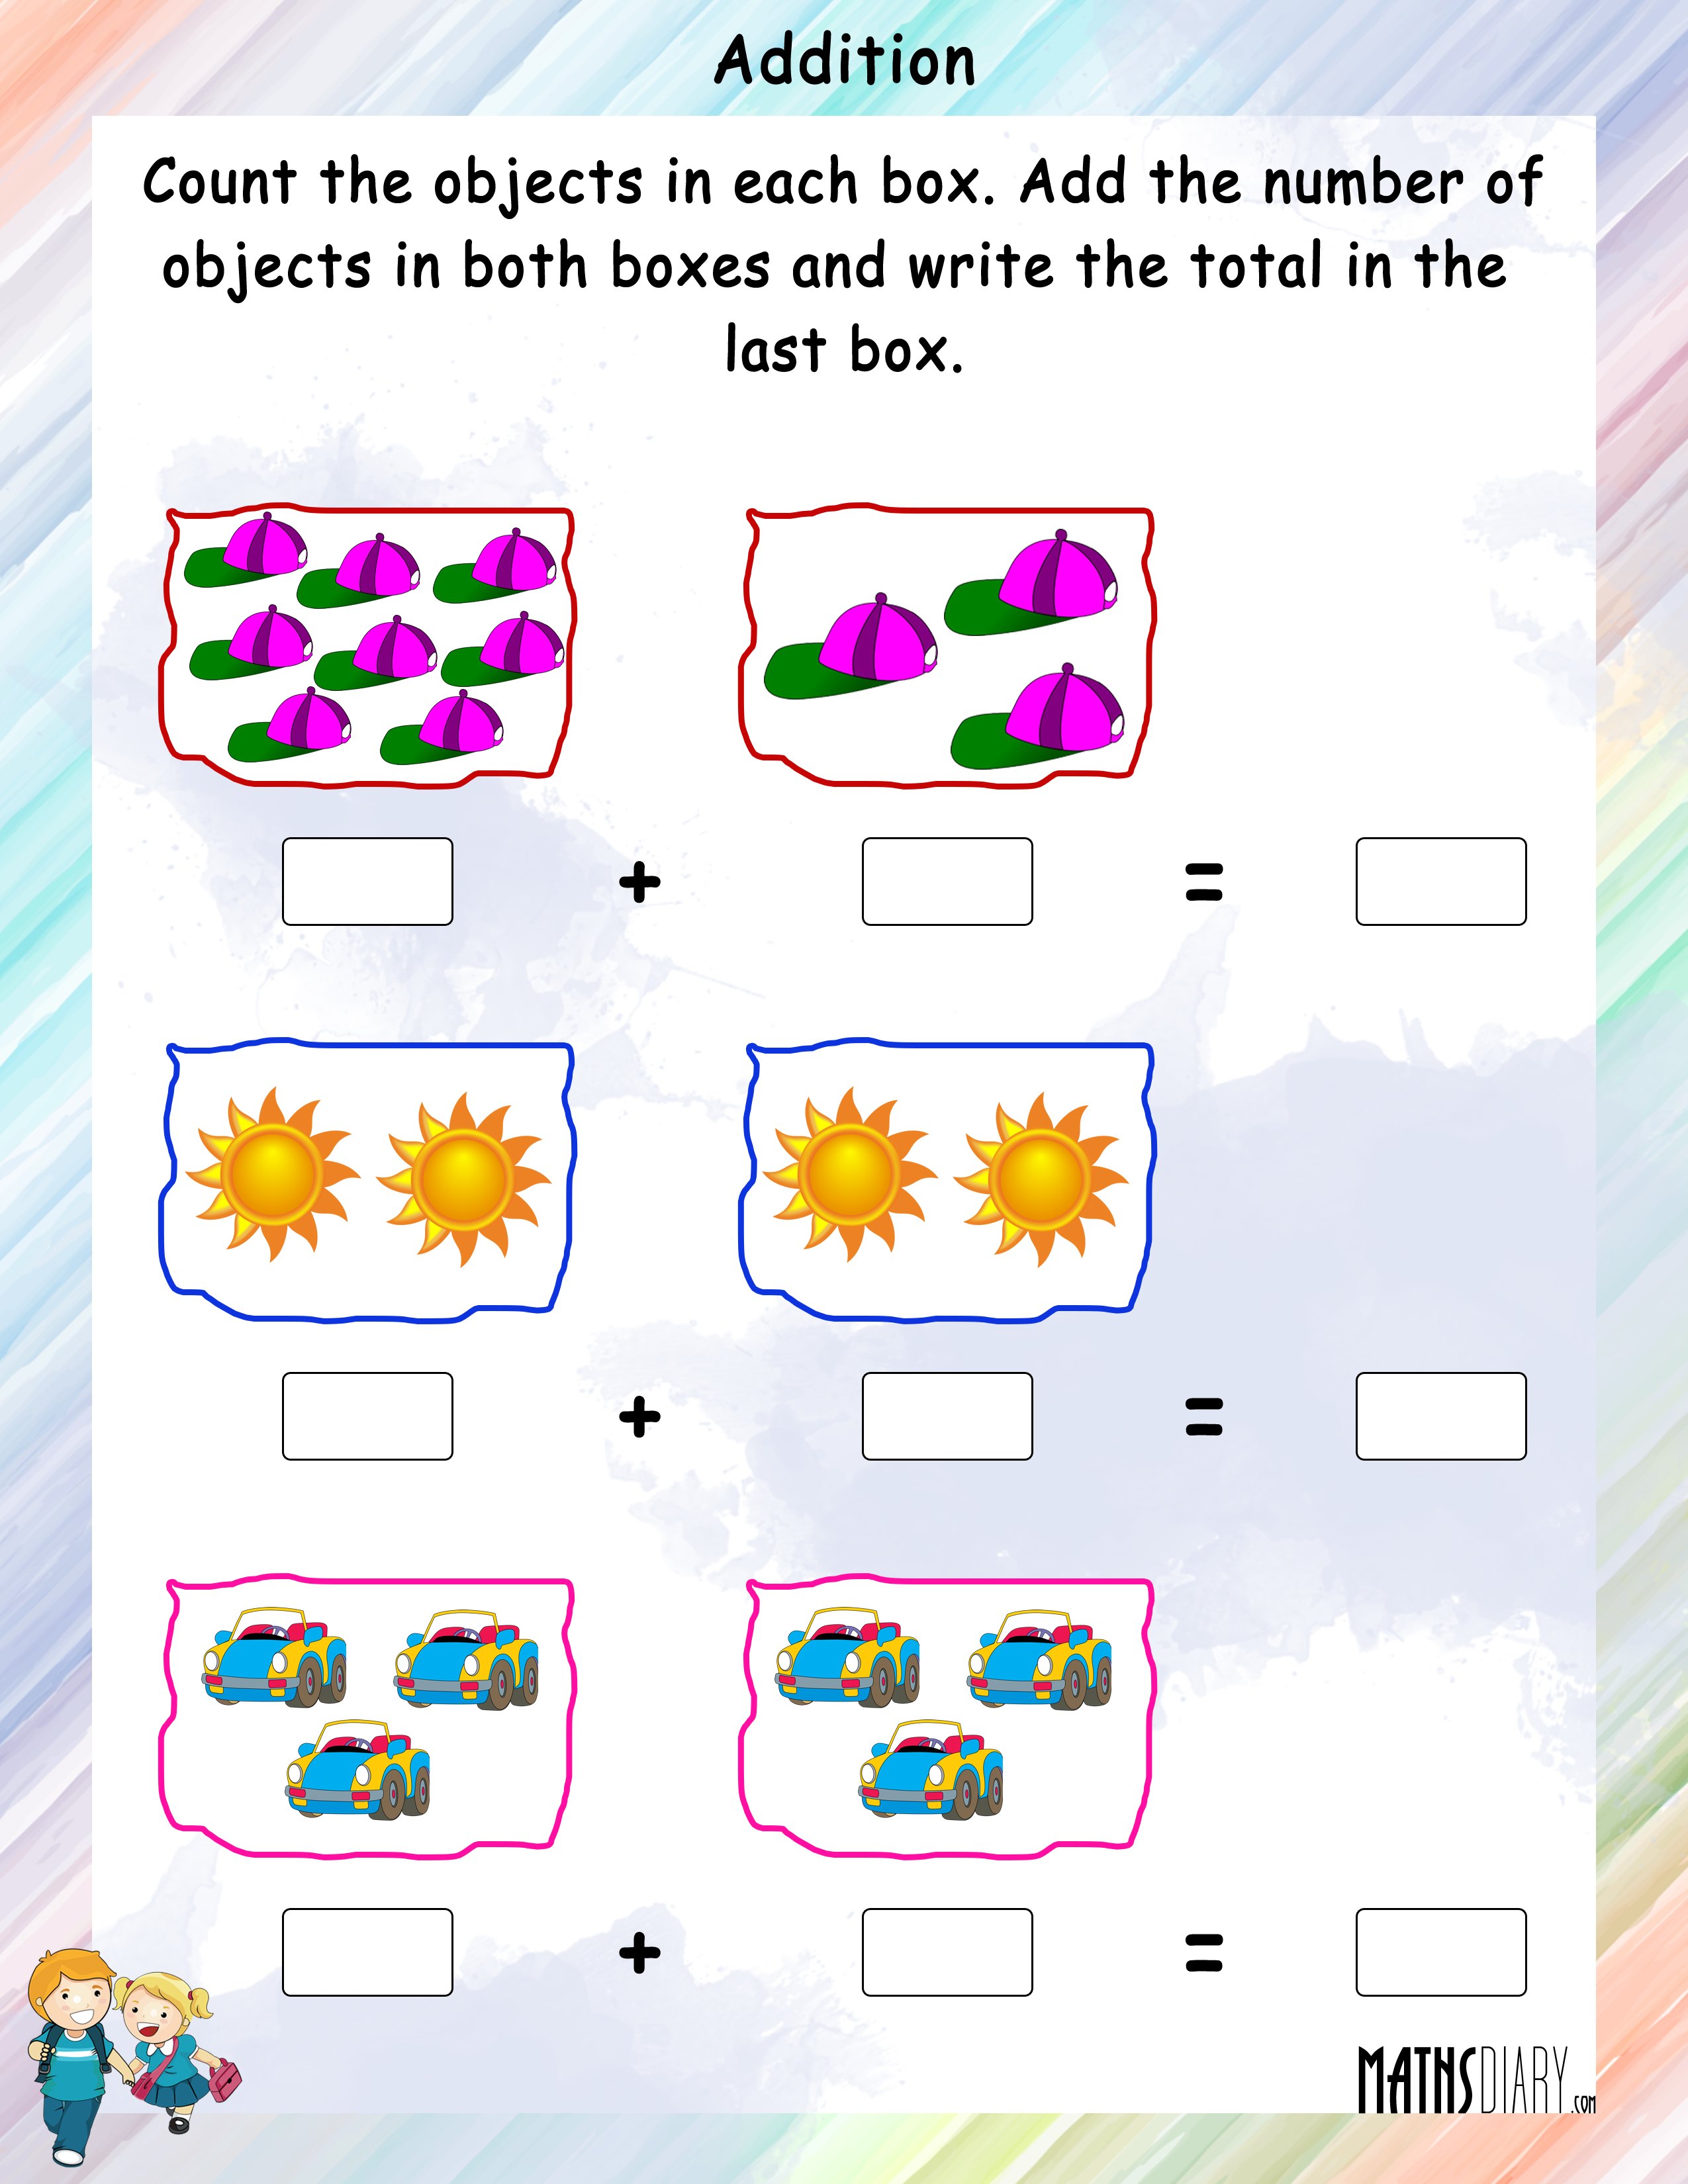 addition-of-objects-math-worksheets-mathsdiary